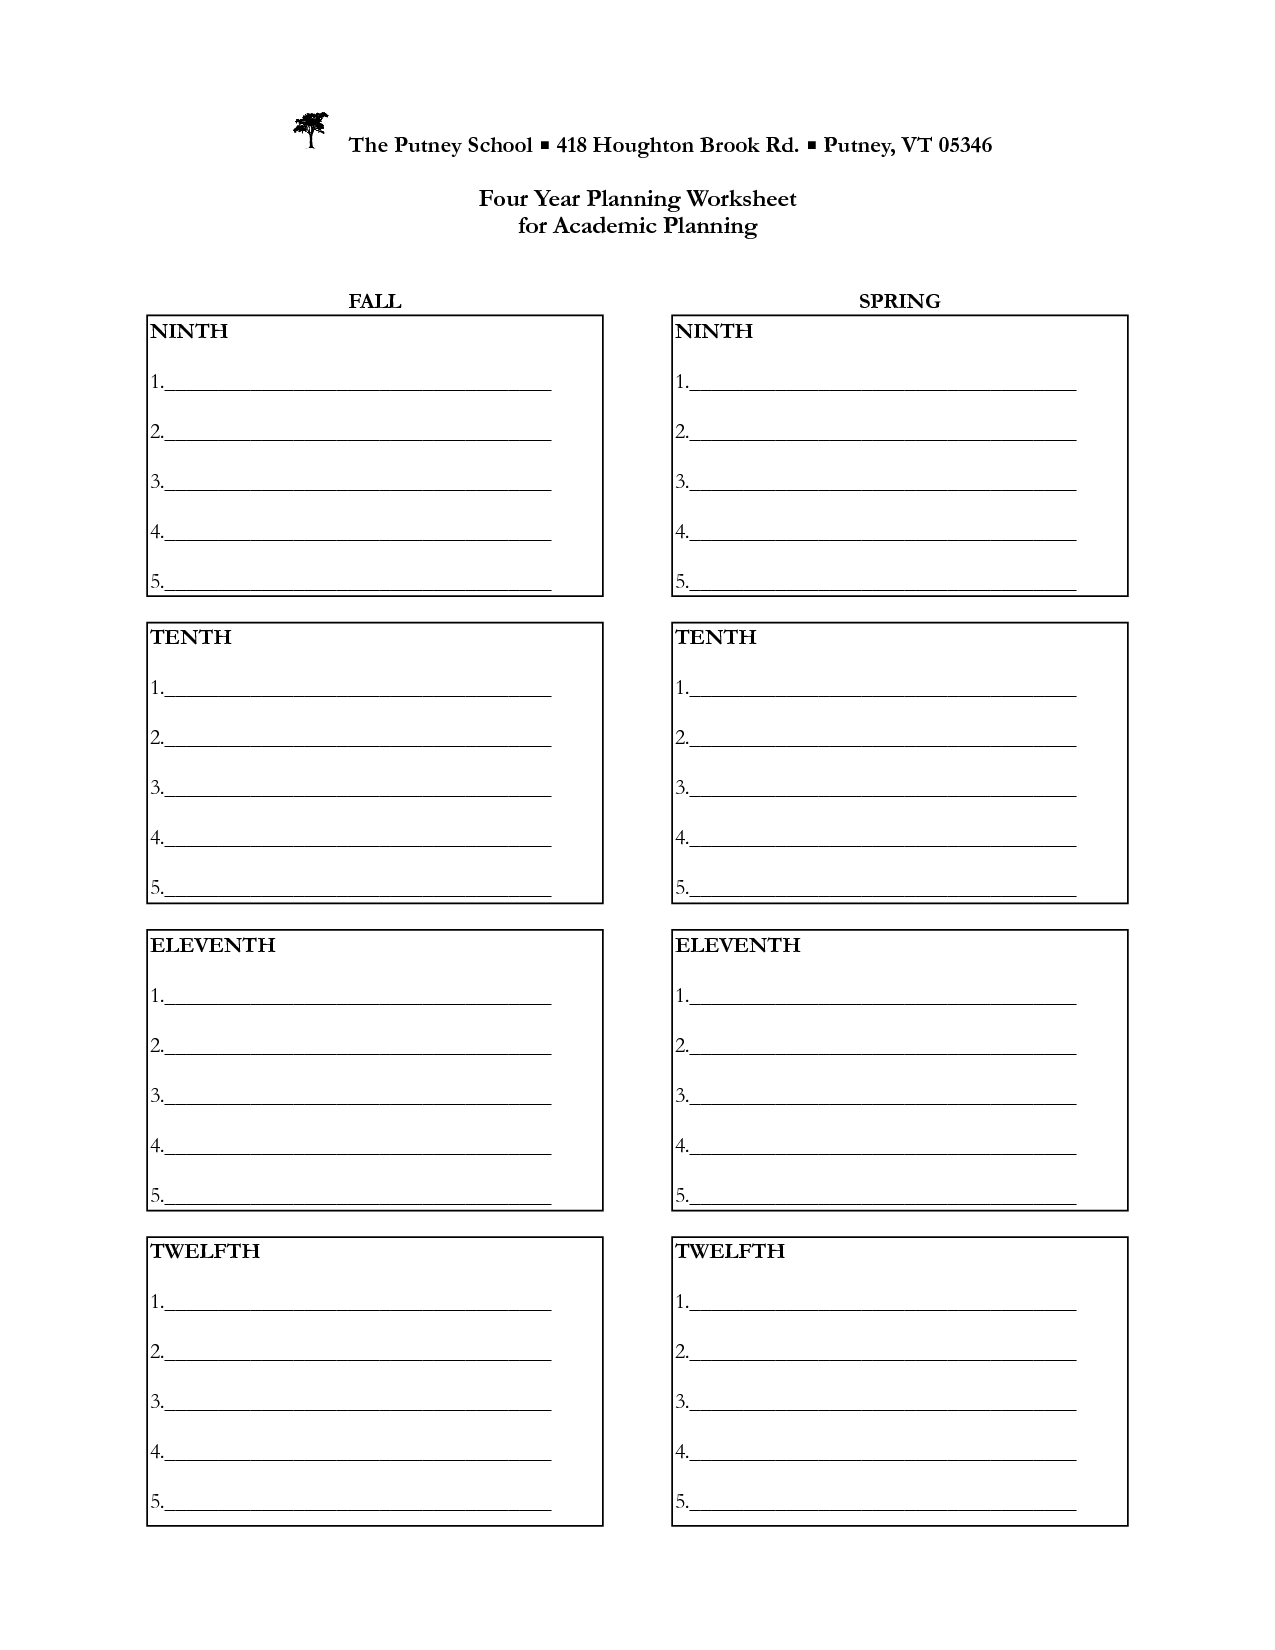 Four-Year Course Planning Worksheet